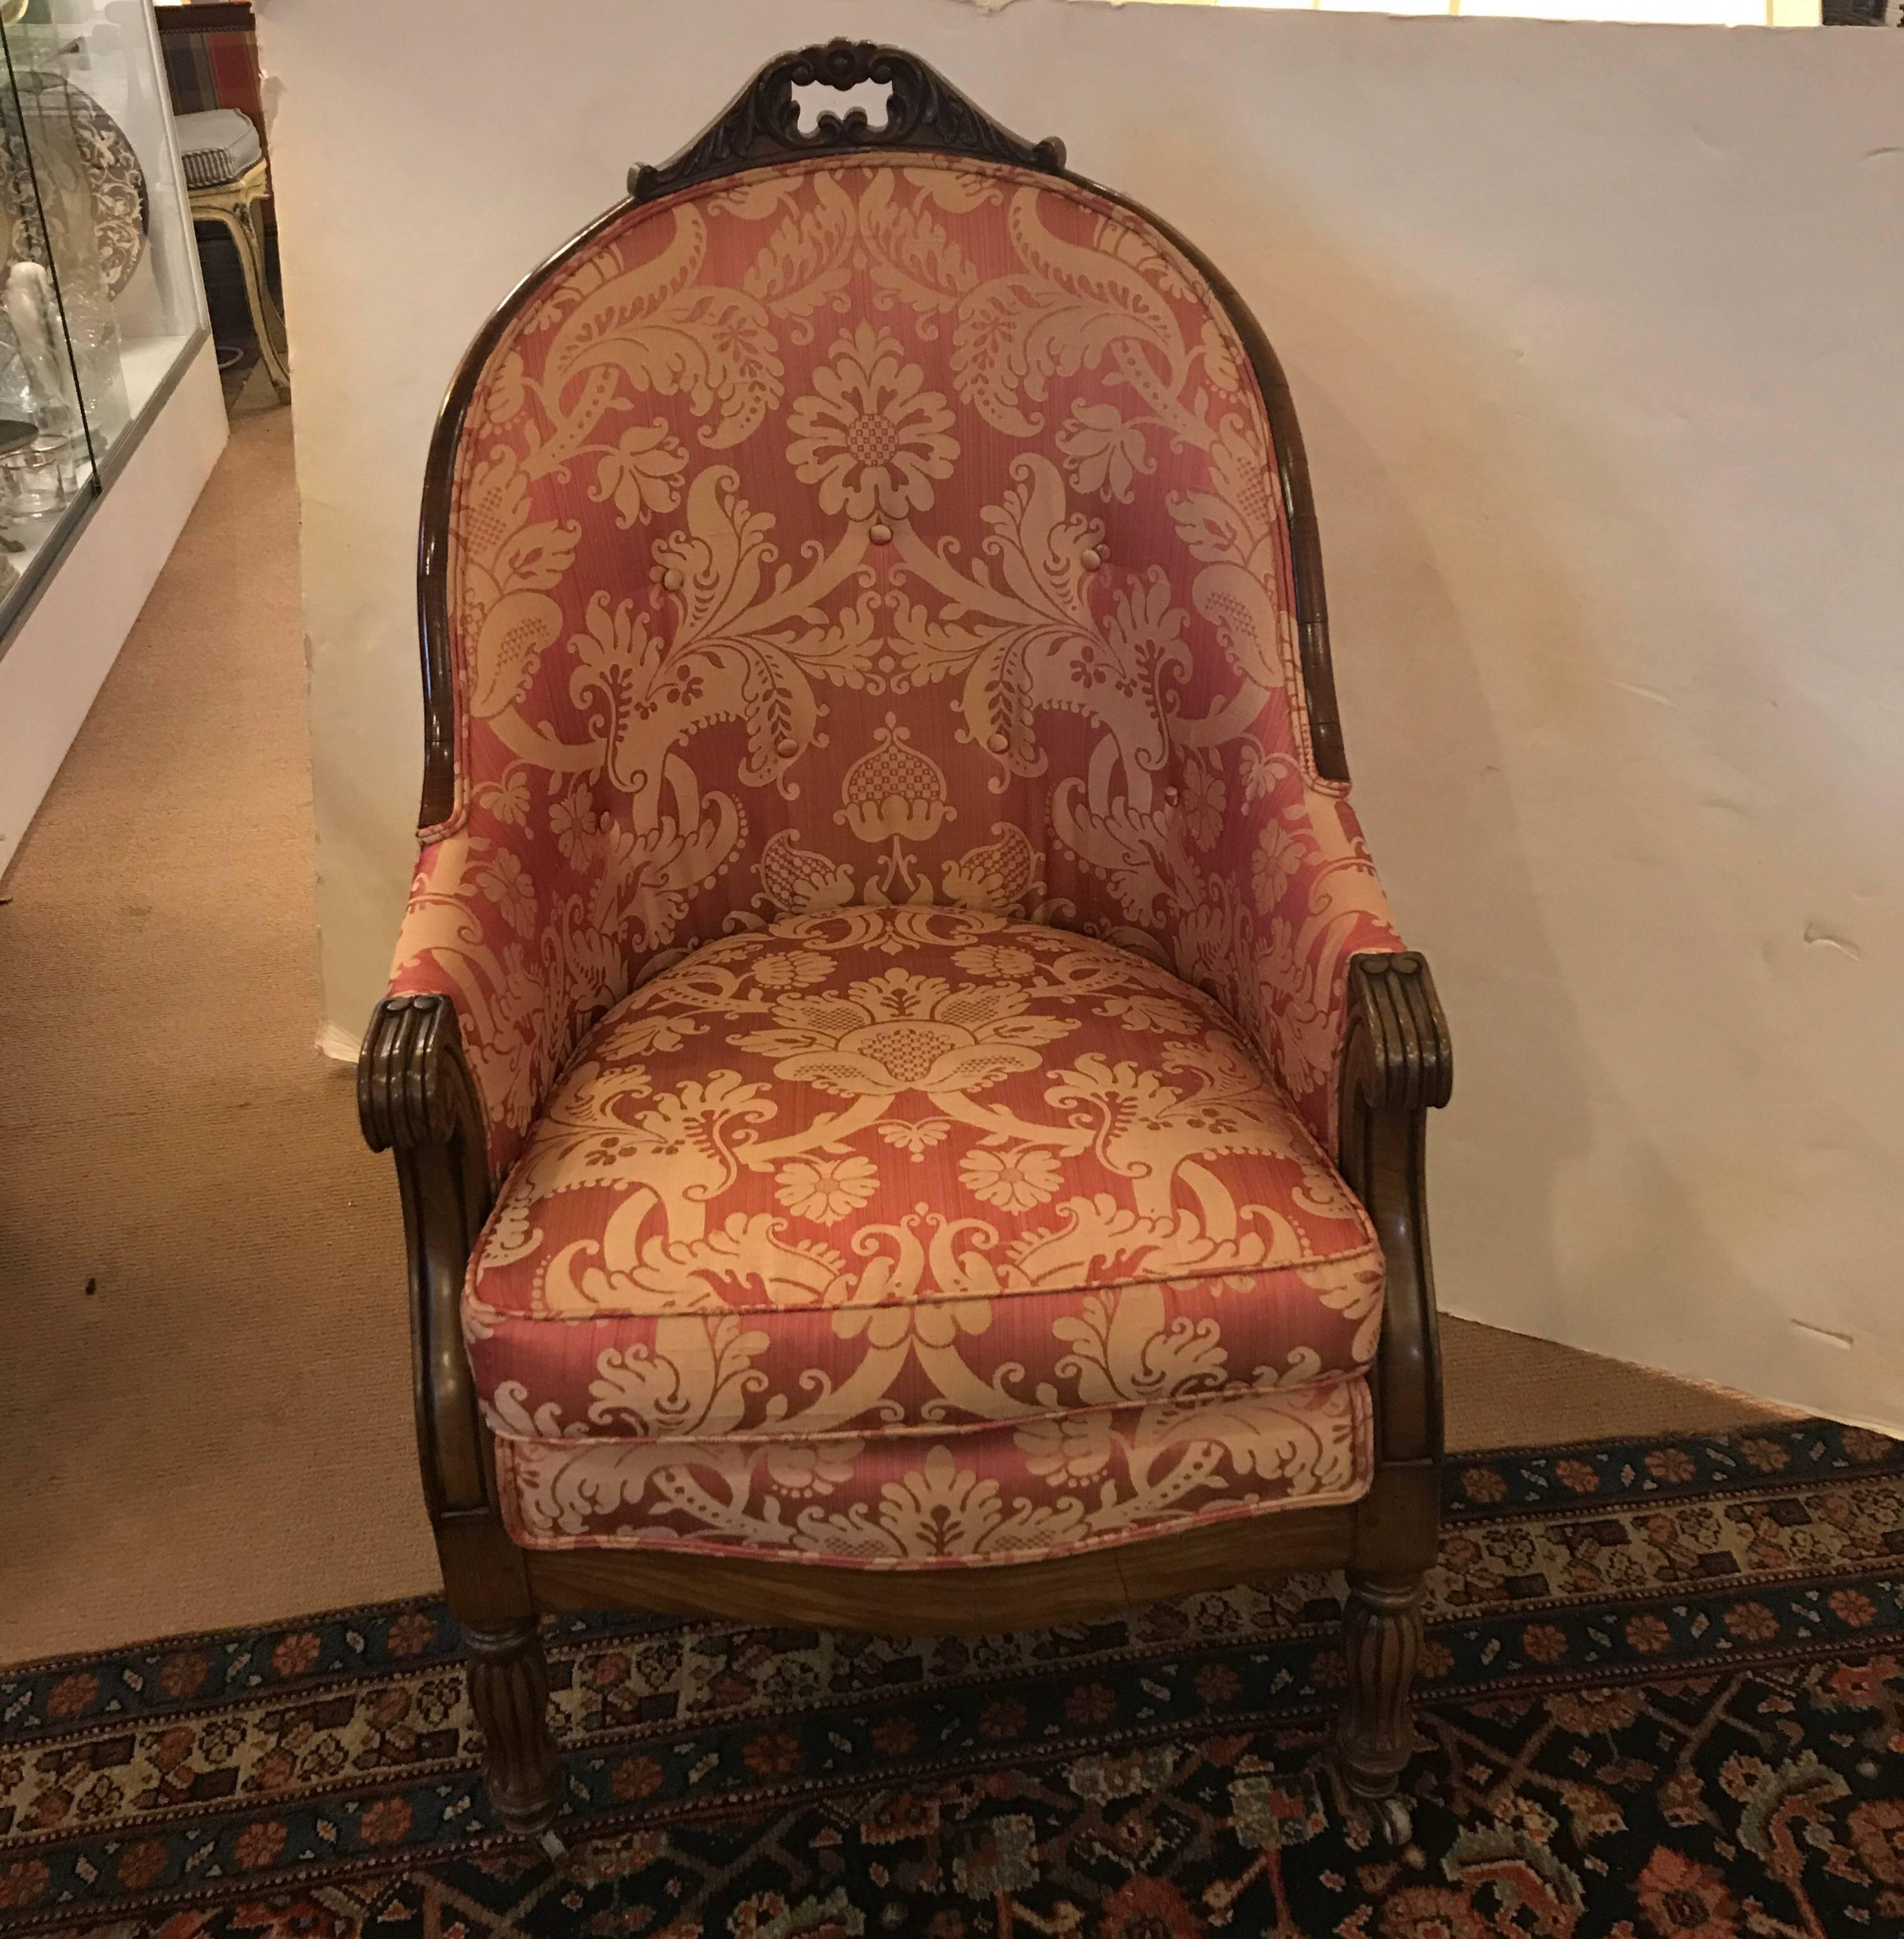 A fine pair of Louis XVI style hand-carved mahogany upholstered Berger chairs with new damask fabric. The arched crest surmounted by pierced leaf and scroll carving with down-swept sides ending with scrolled hand holds. The upholstered seats raised